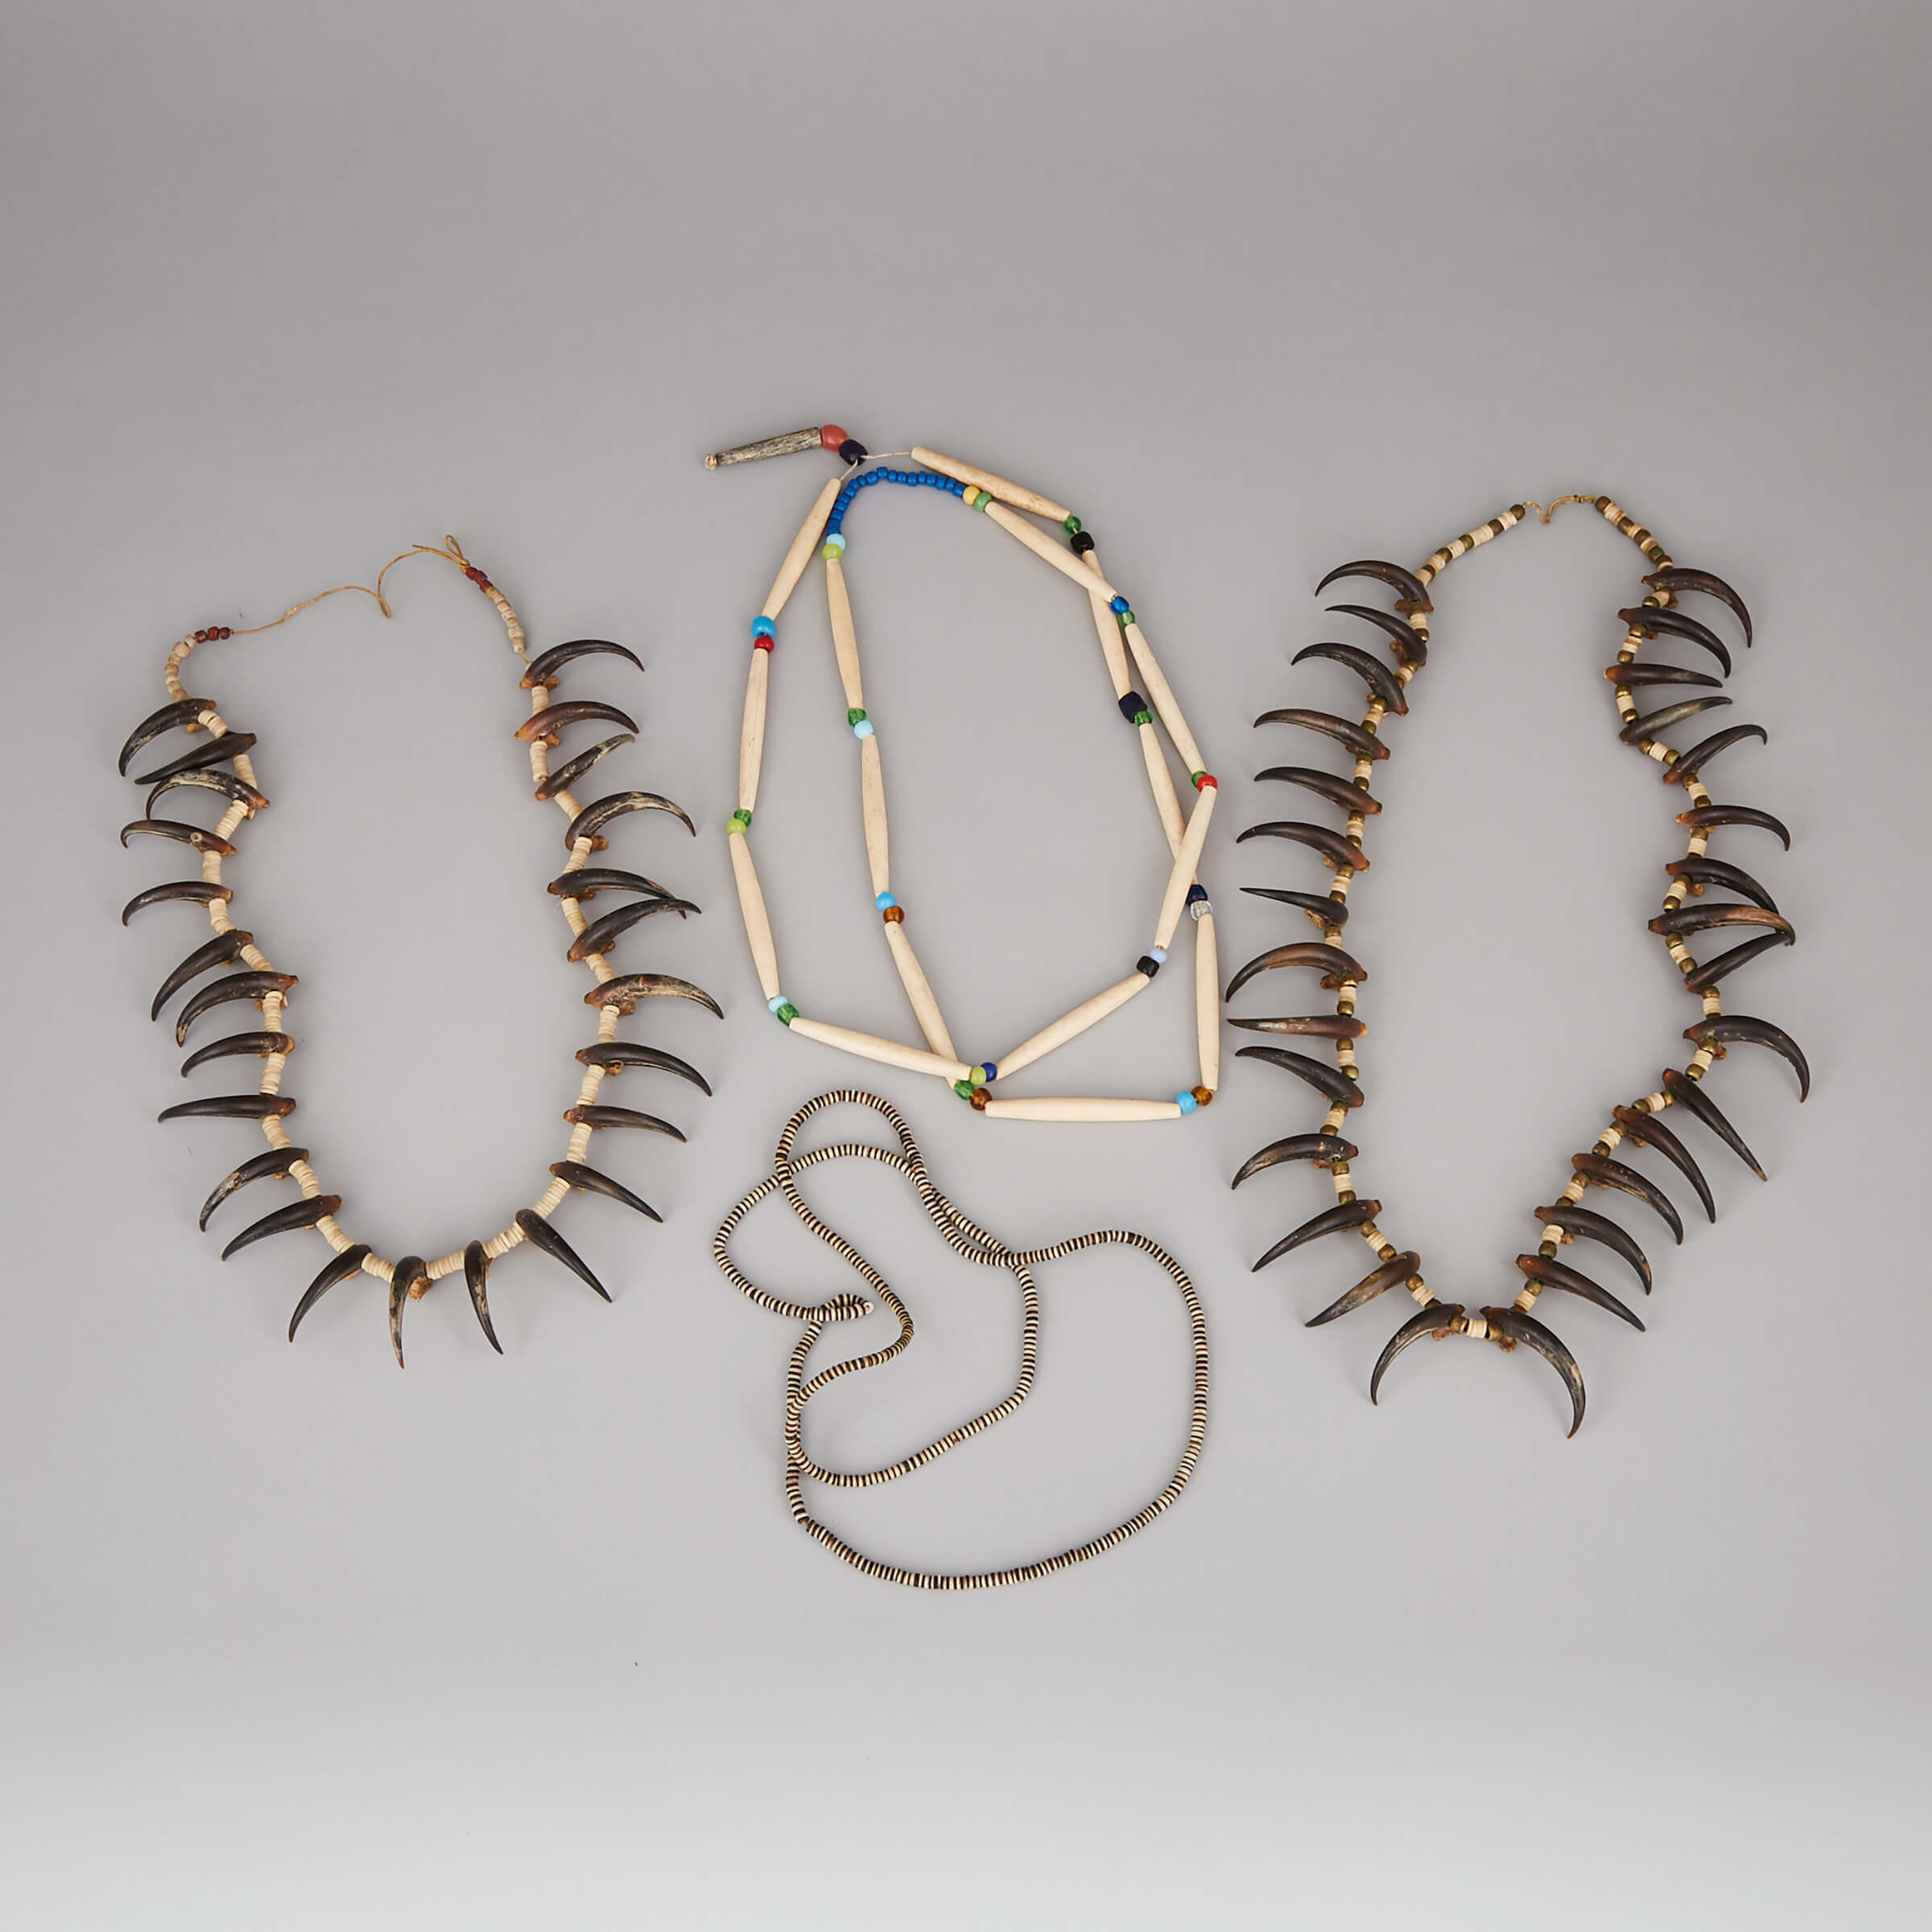 Four Native North American Necklaces, early 20th century